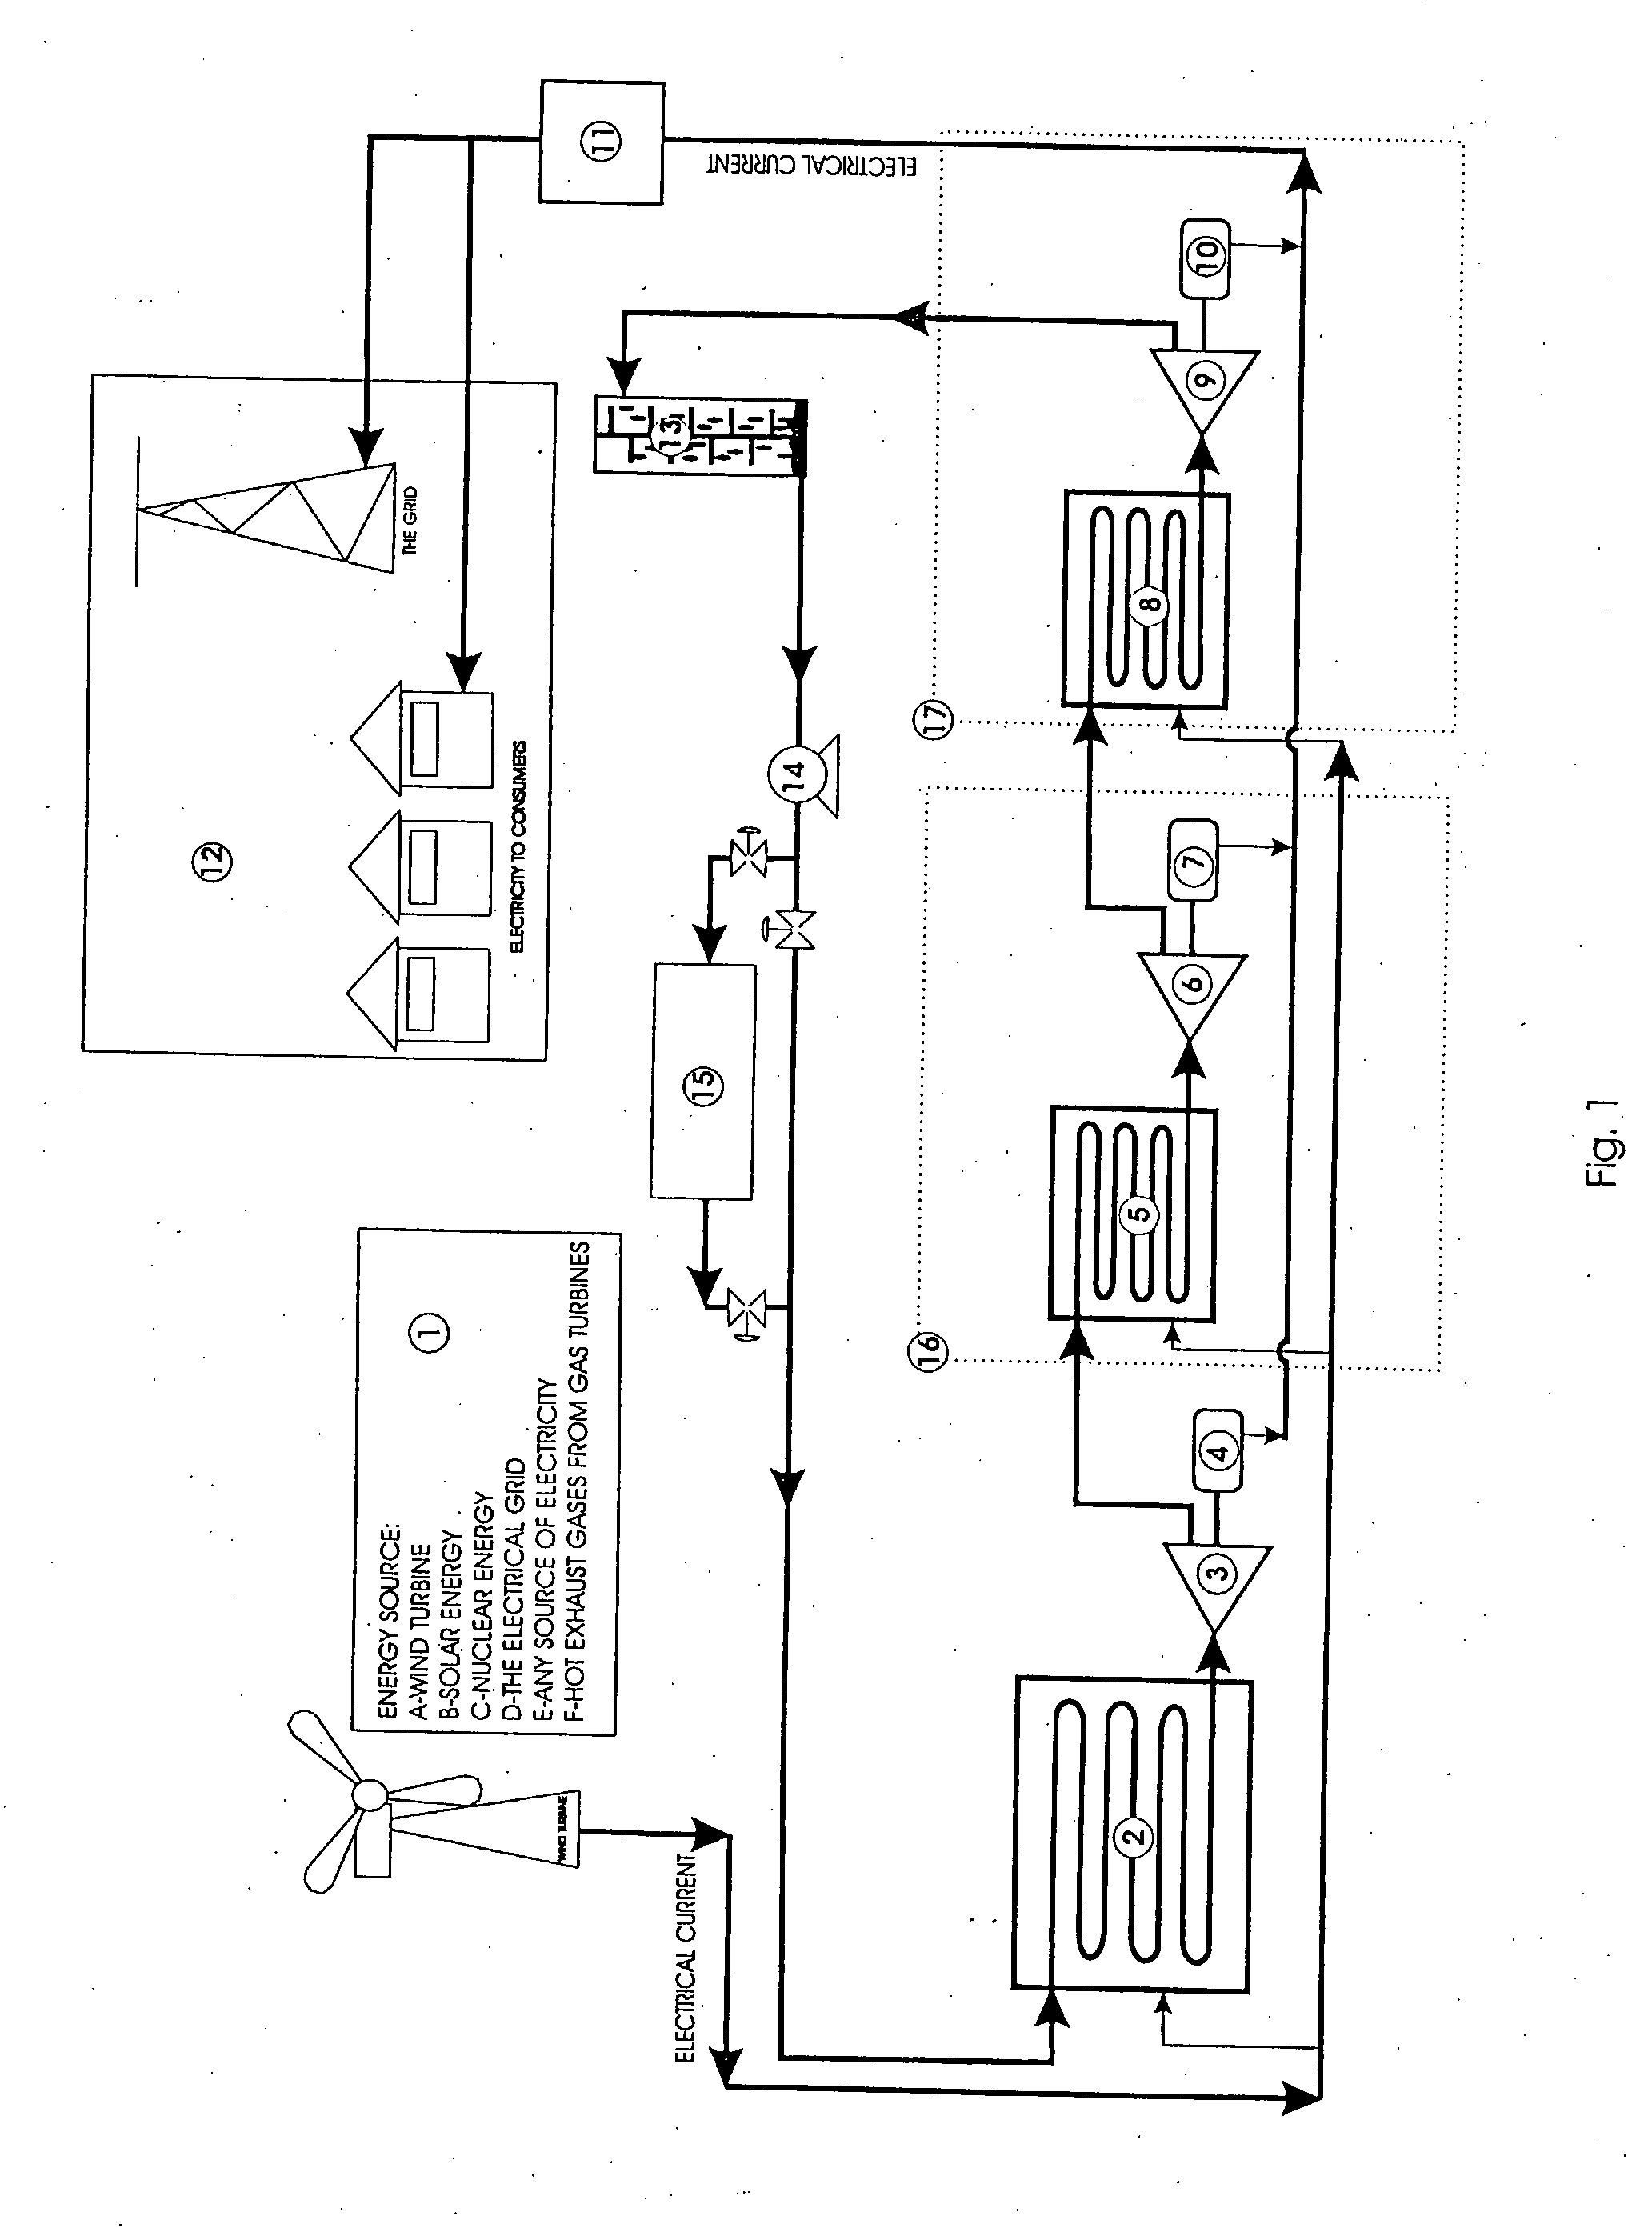 Electric Power Plant With Thermal Storage Medium